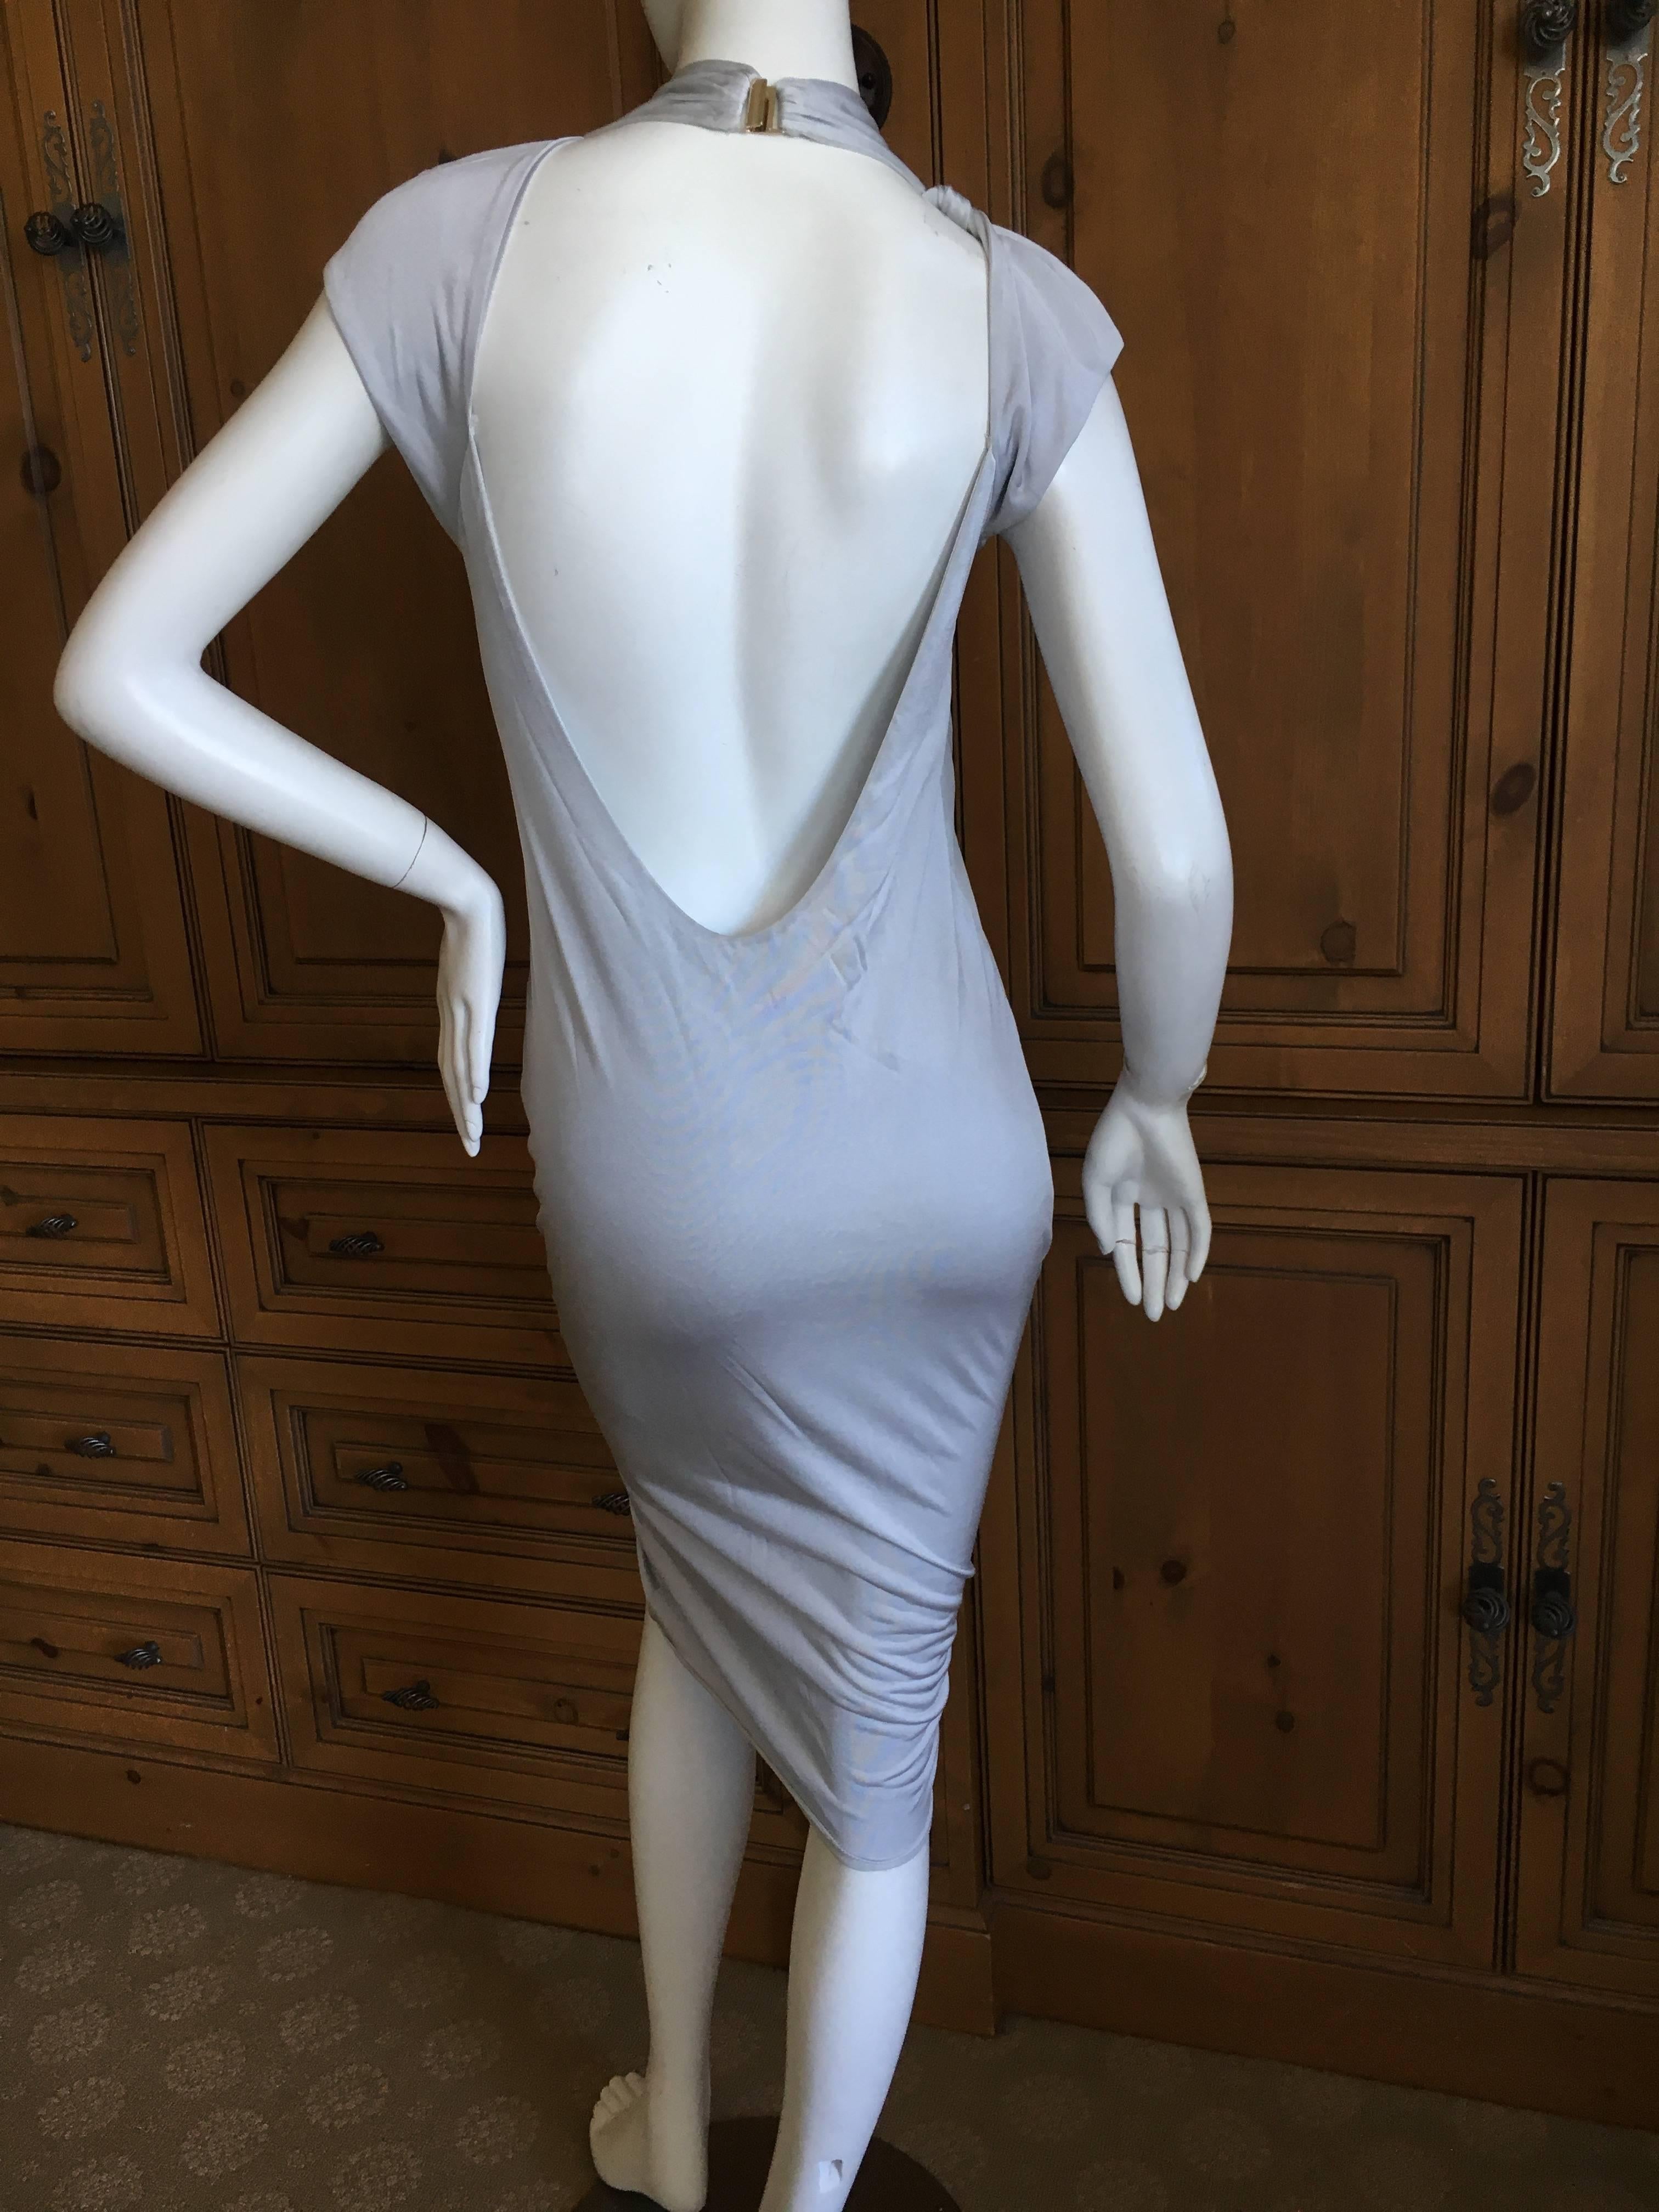 Gucci by Tom Ford Silver Backless Keyhole Dress.
So sexy, size M